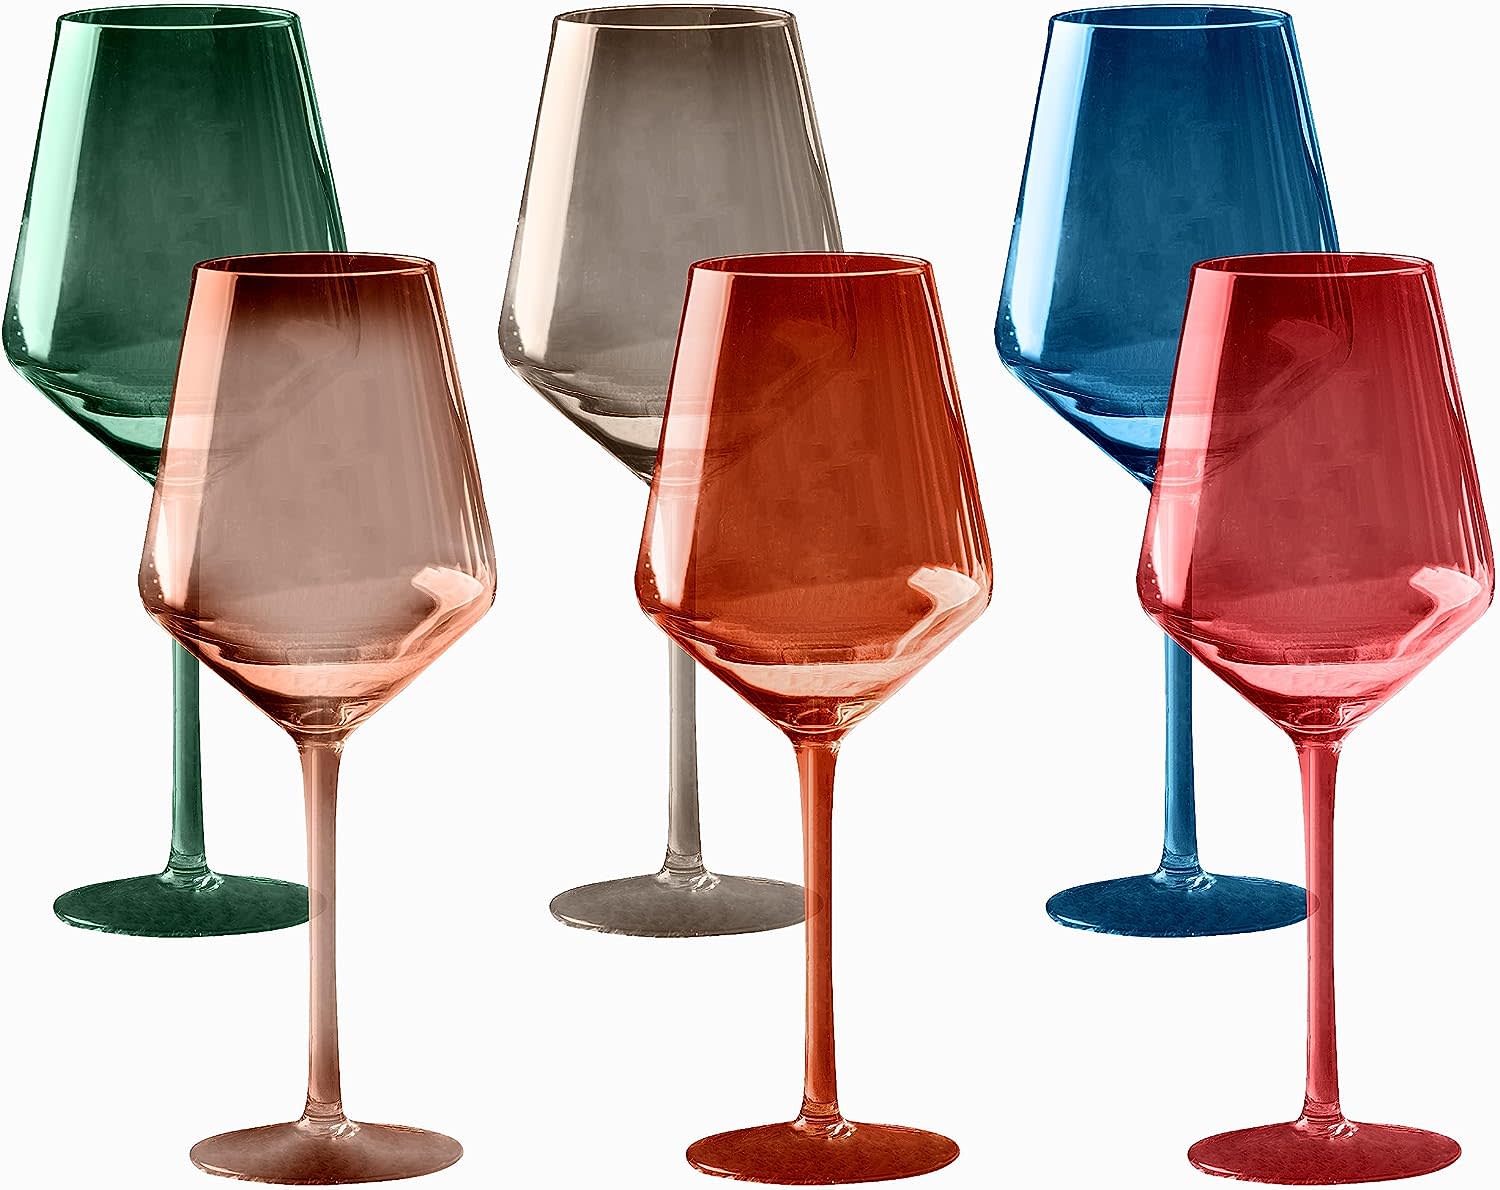 The Best Wine Glasses - 15 to-die-for wine glasses that you need